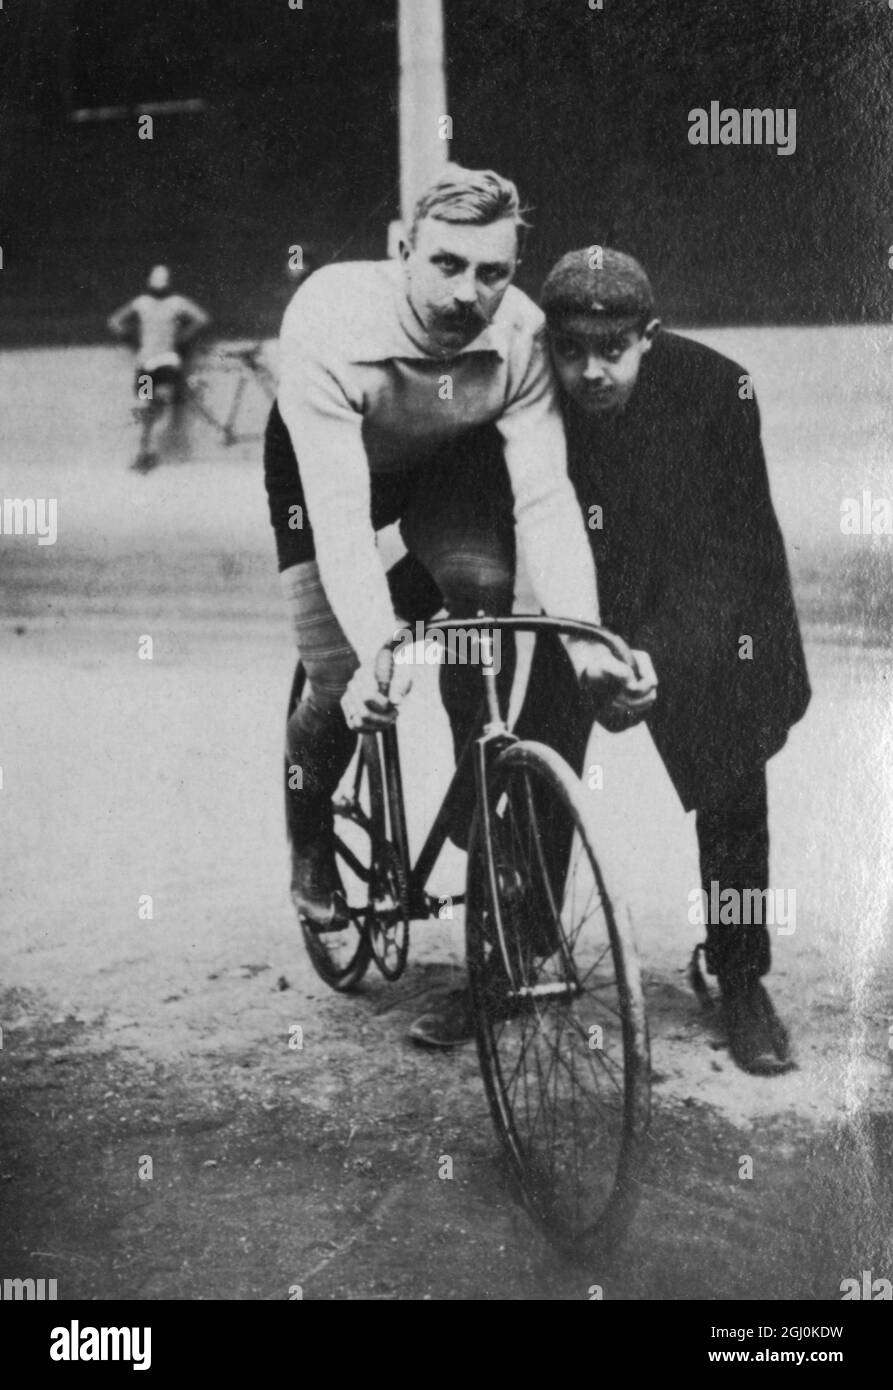 Thorwald Ellegaard - (born in Odensee 7th March 1877 - 27 April 1954) The UCI Track Cycling World Championships - Men's Sprint is the world championship sprint event held annually at the UCI Track Cycling World Championships. He won the following events: Gold medals: 1901 Berlin 1902 Rome 1903 Copenhagen 1906 Geneva 1908 Berlin 1911 Rome Silver medals: 1904-London 1905 Antwerp 1910 Brussels 1913 Leipzig ©TopFoto Stock Photo